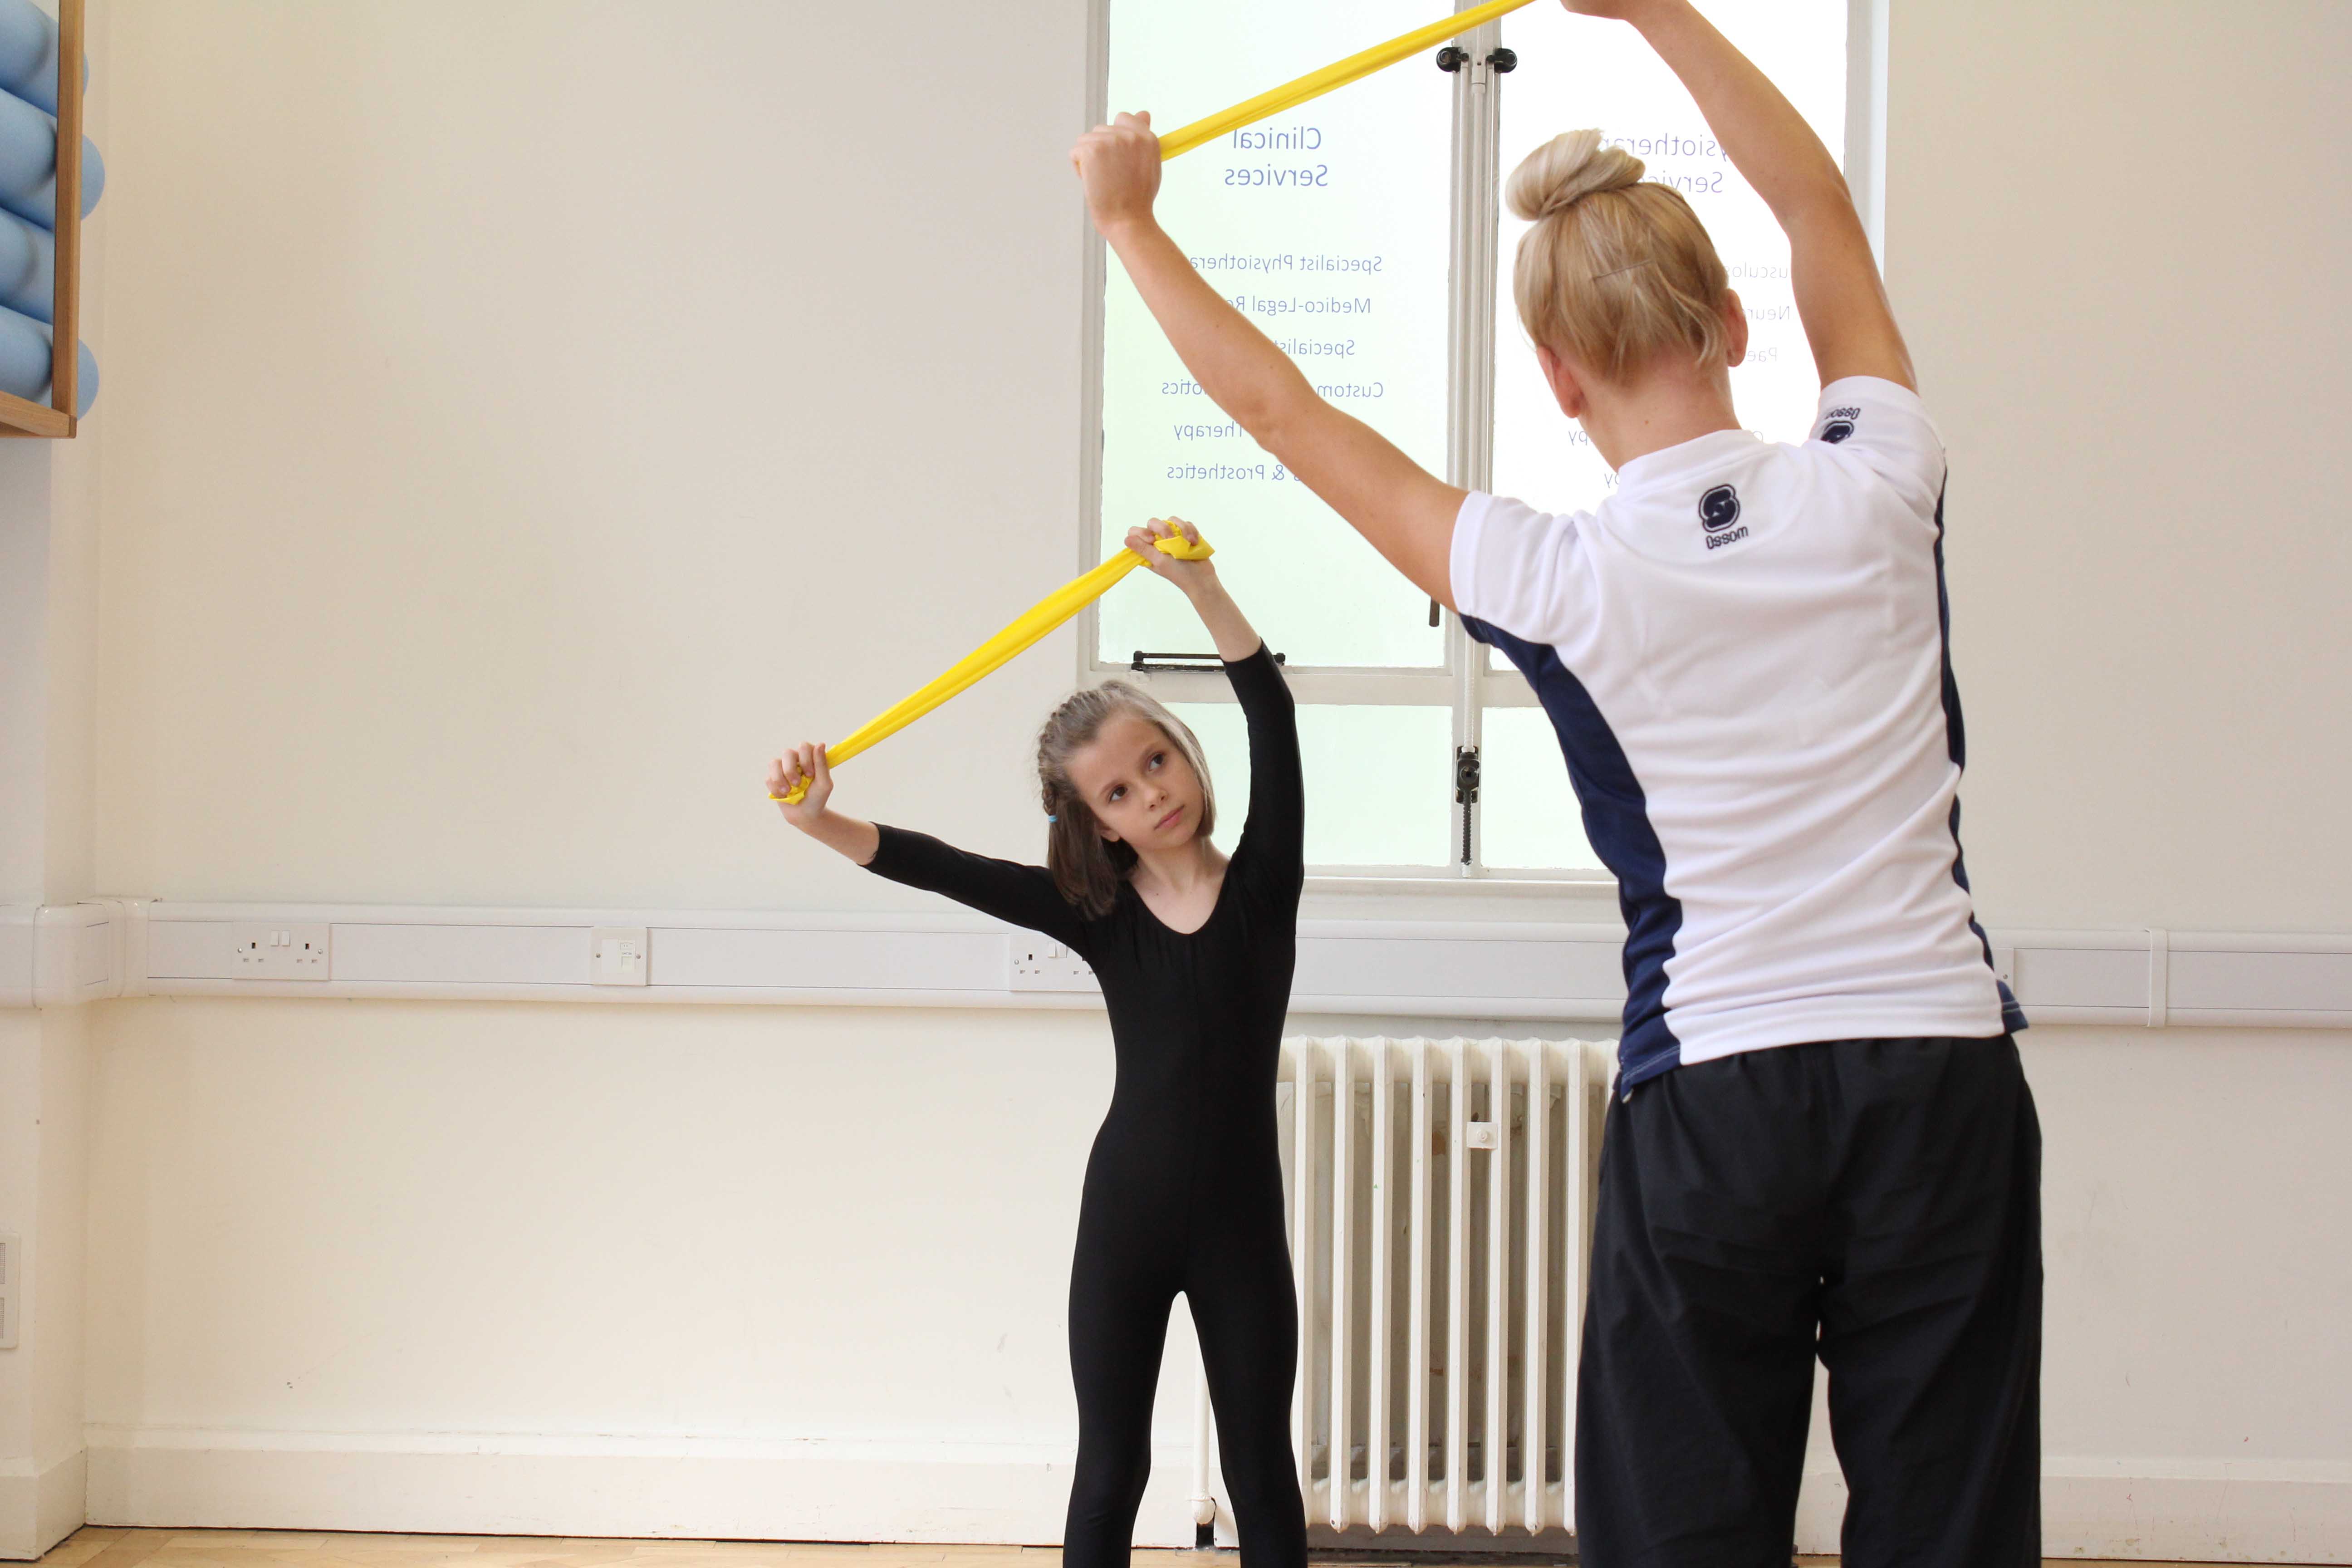 IMproving respiratory function and exercise tolerance through directed play